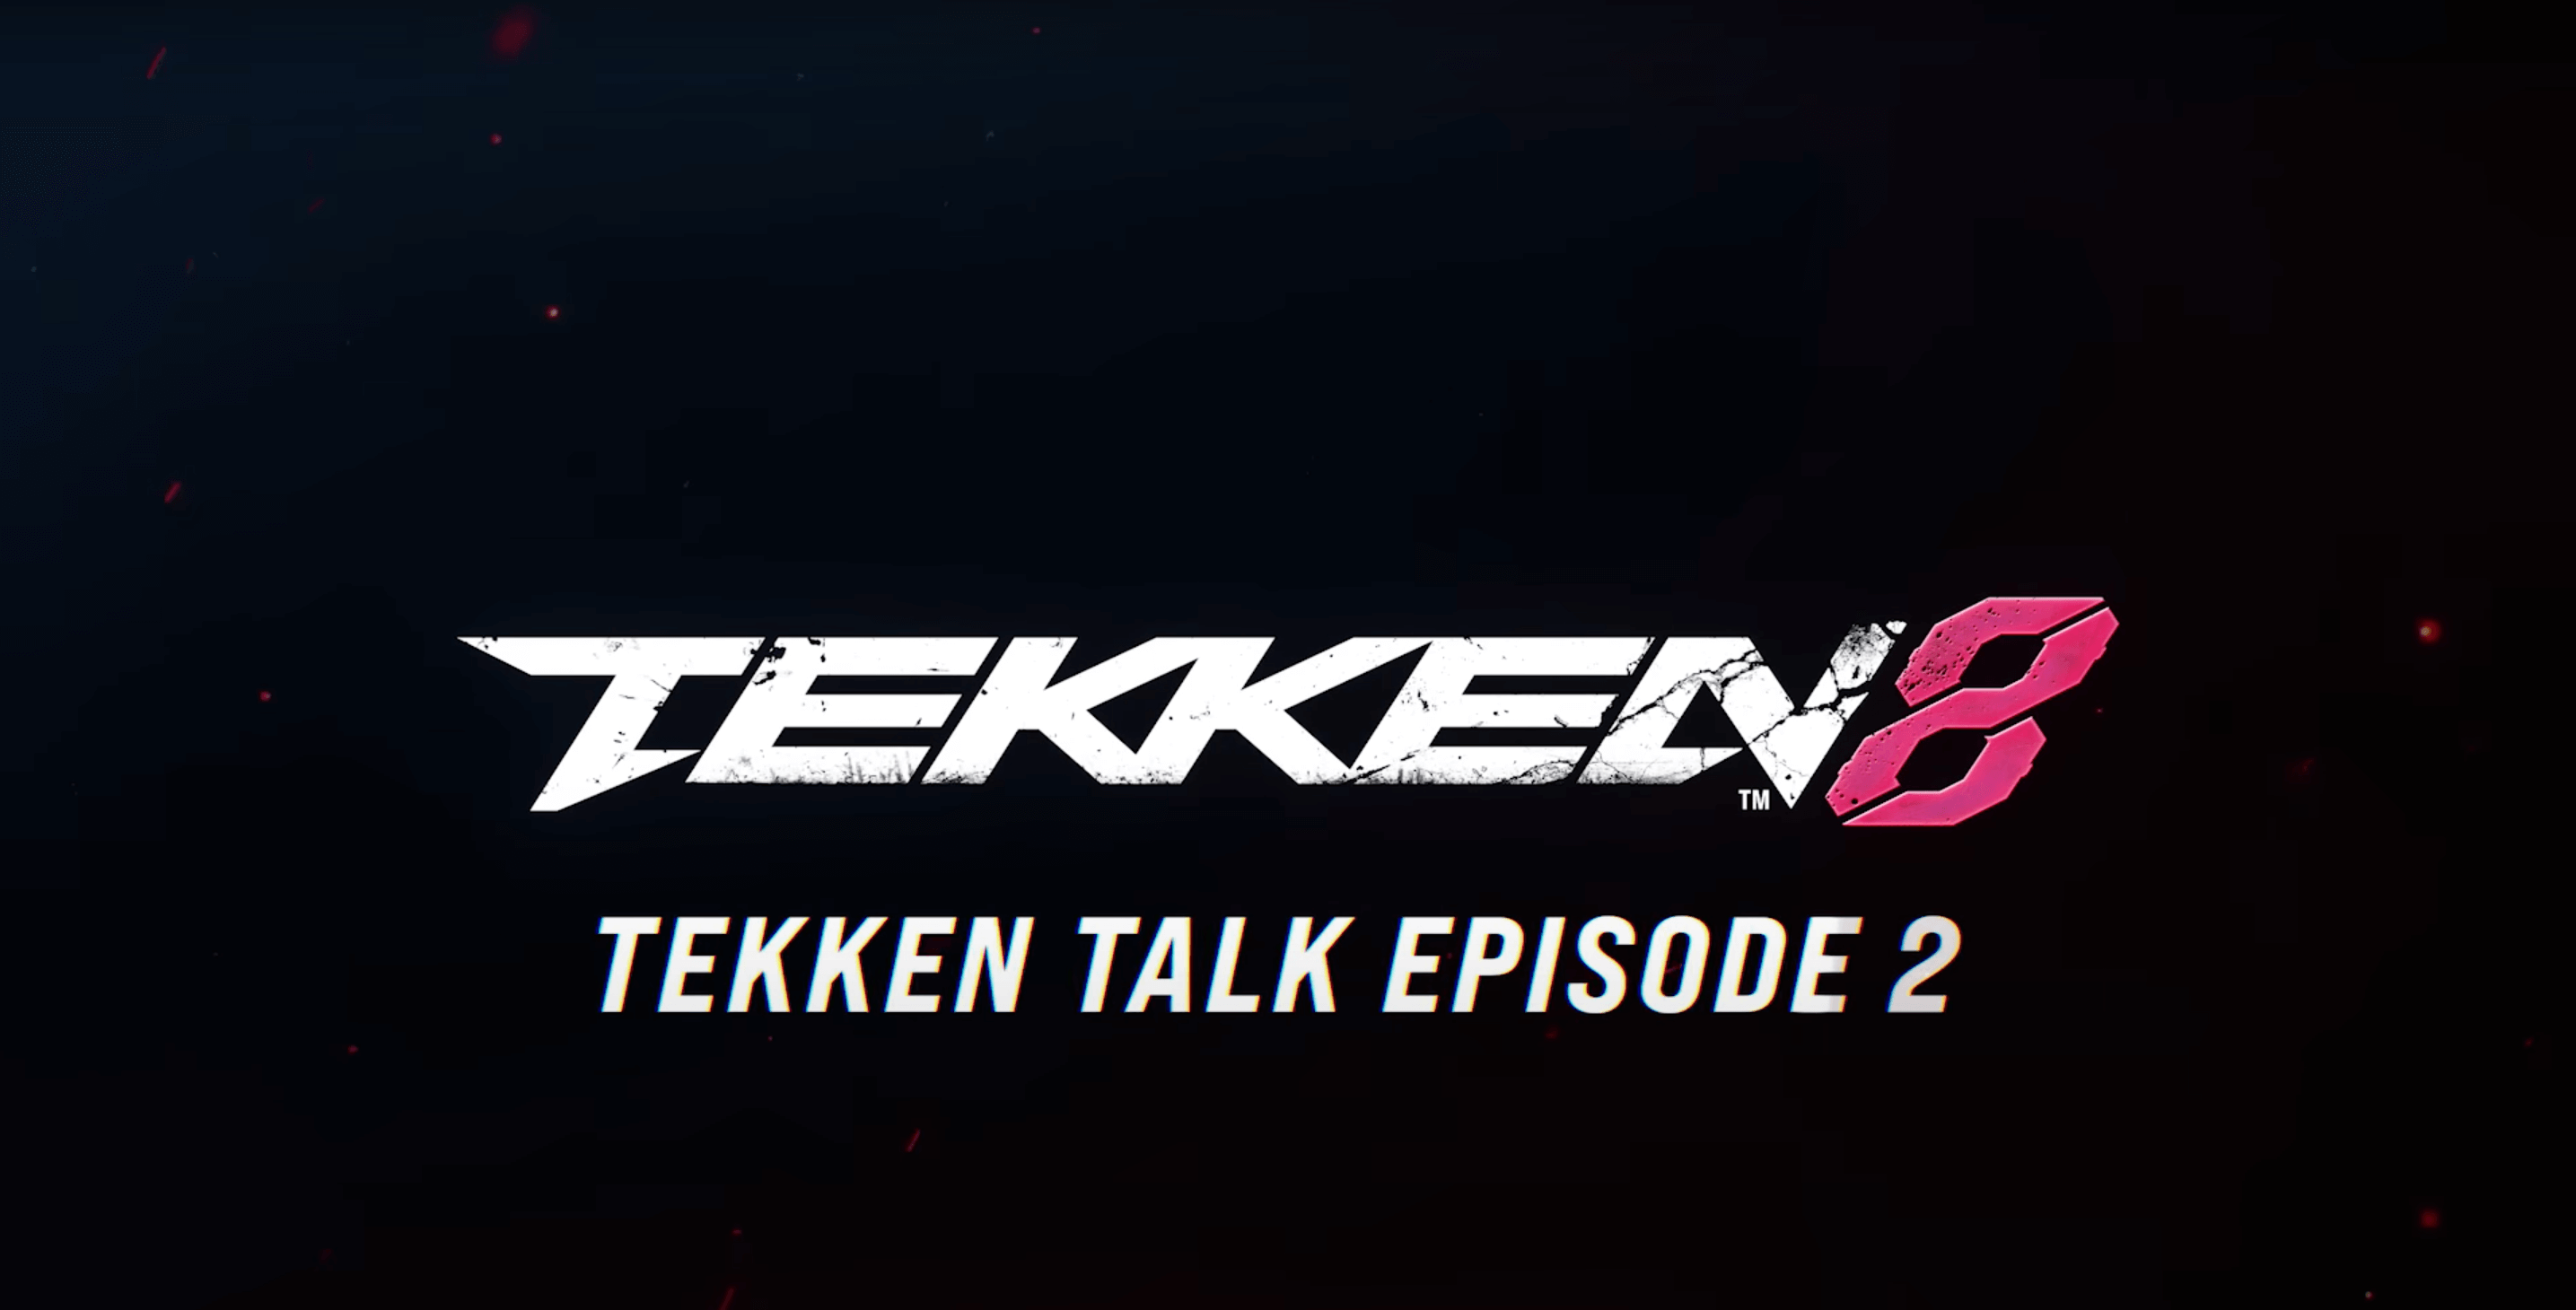 The latest TEKKEN Talk Episode Contains New Gameplay and CNT Details